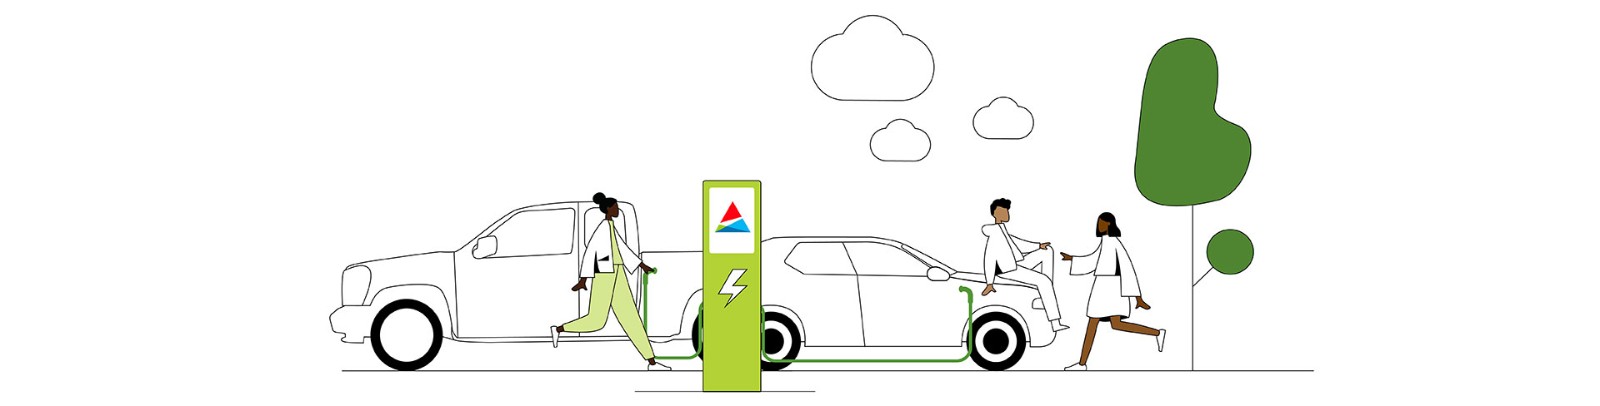 Illustrated electric vehicles and charging stations